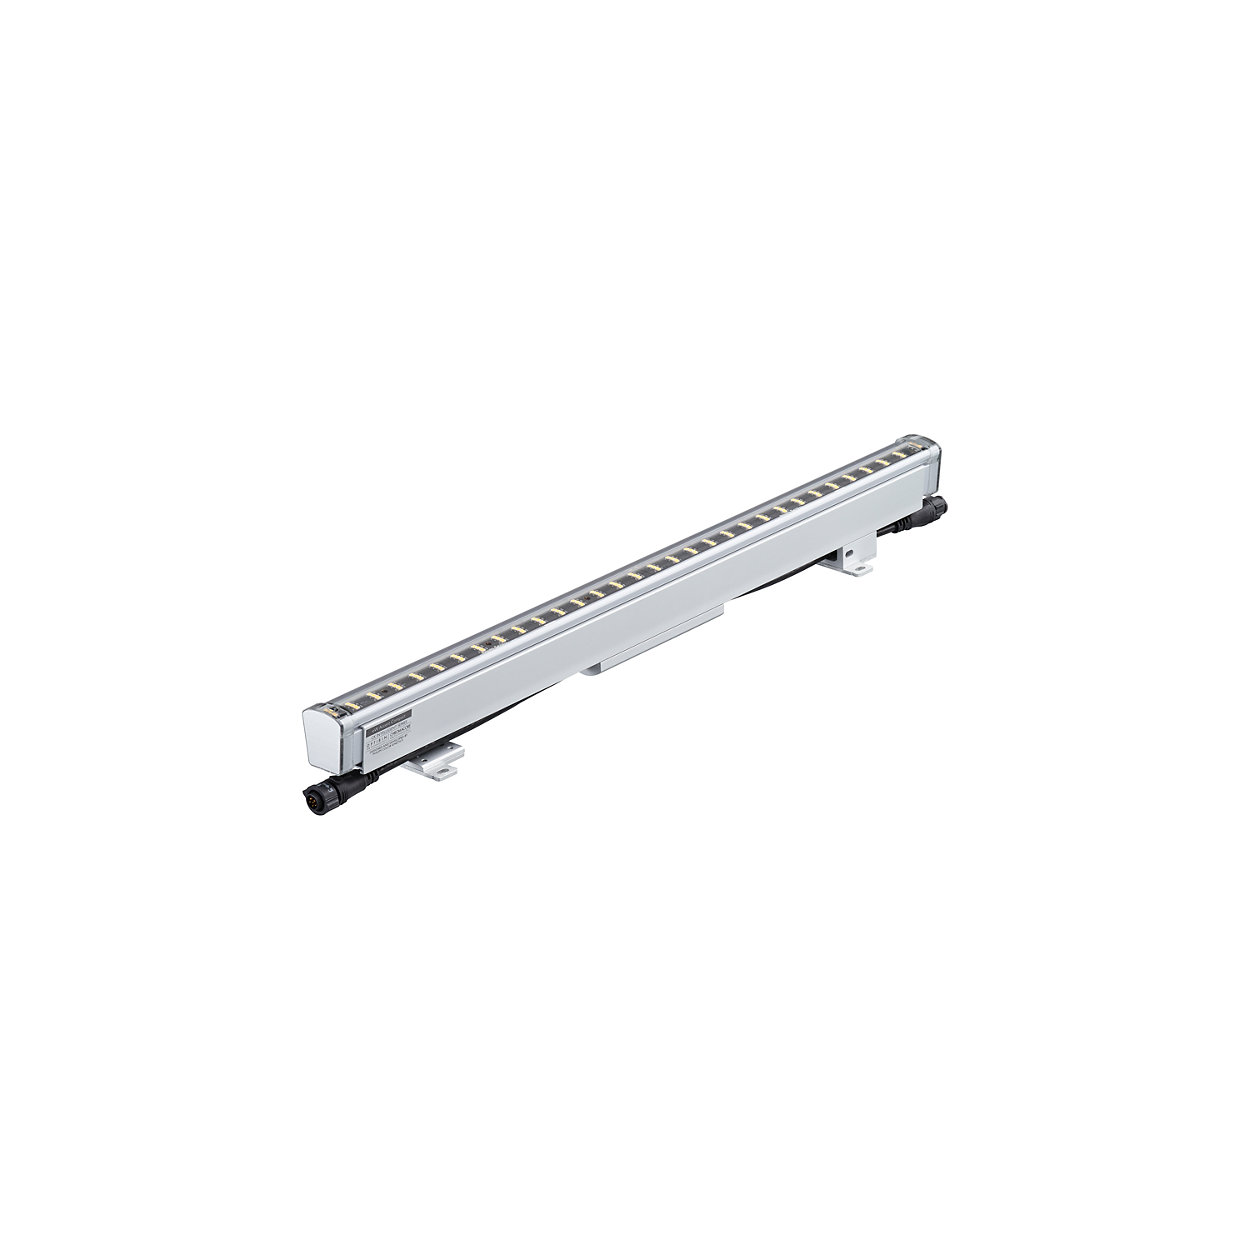 eW Accent Compact - High resolution media direct view linear LED luminaire with solid white light